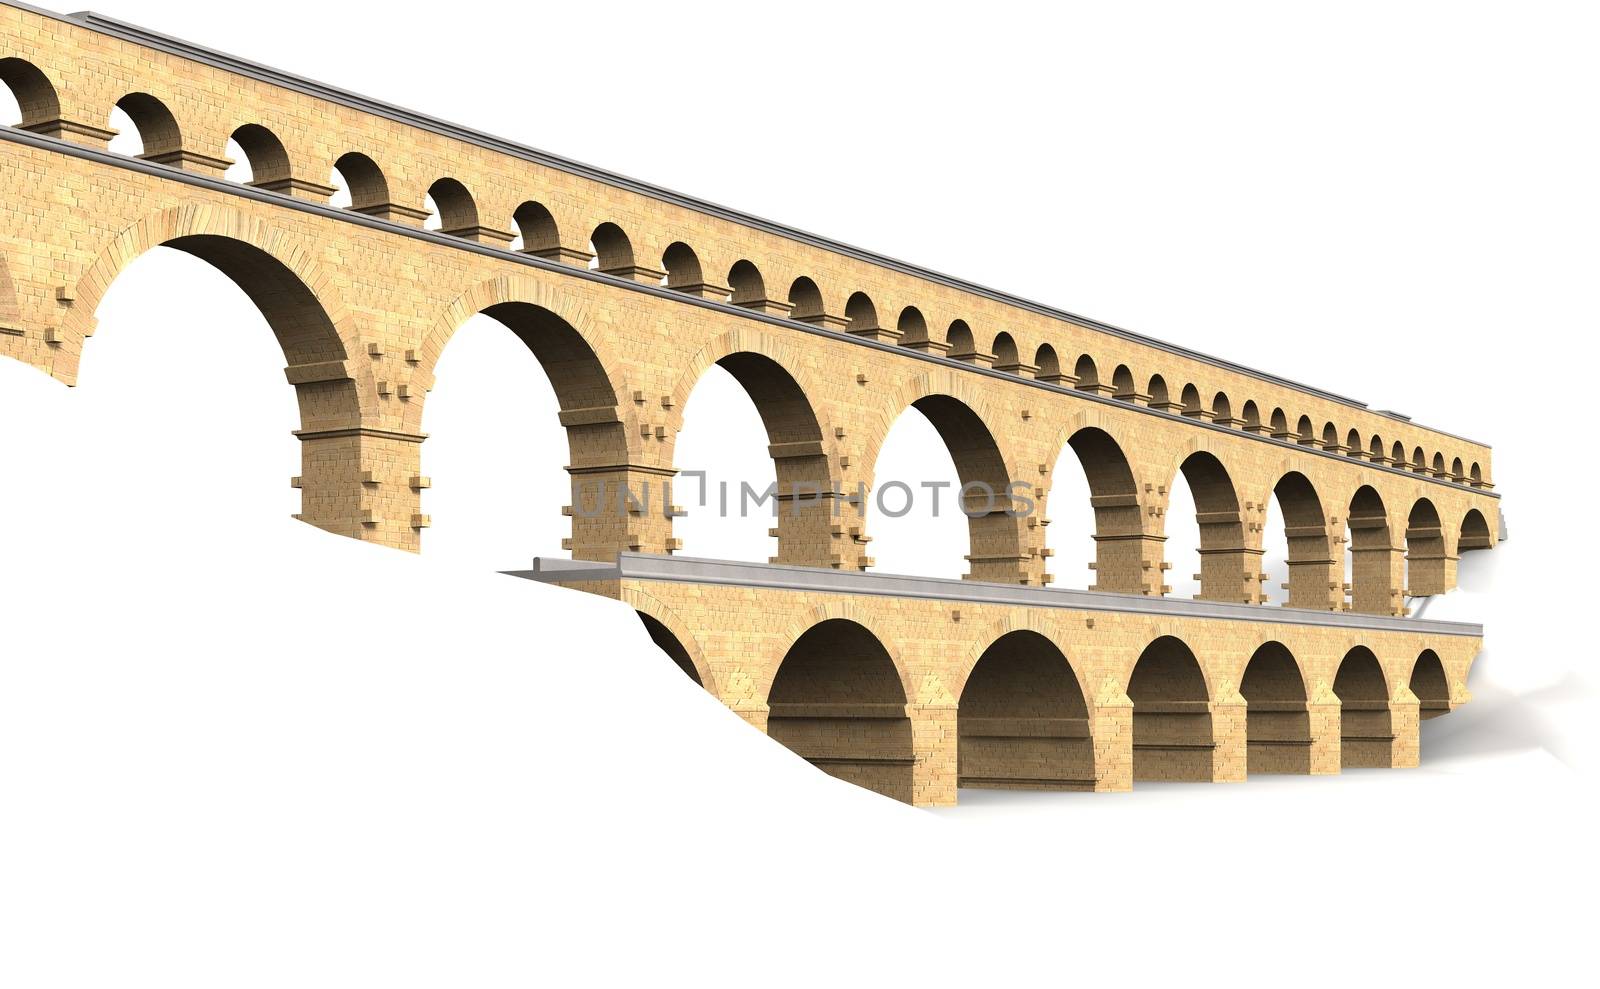 The Pont du Gard is a Roman aqueduct in southern France.